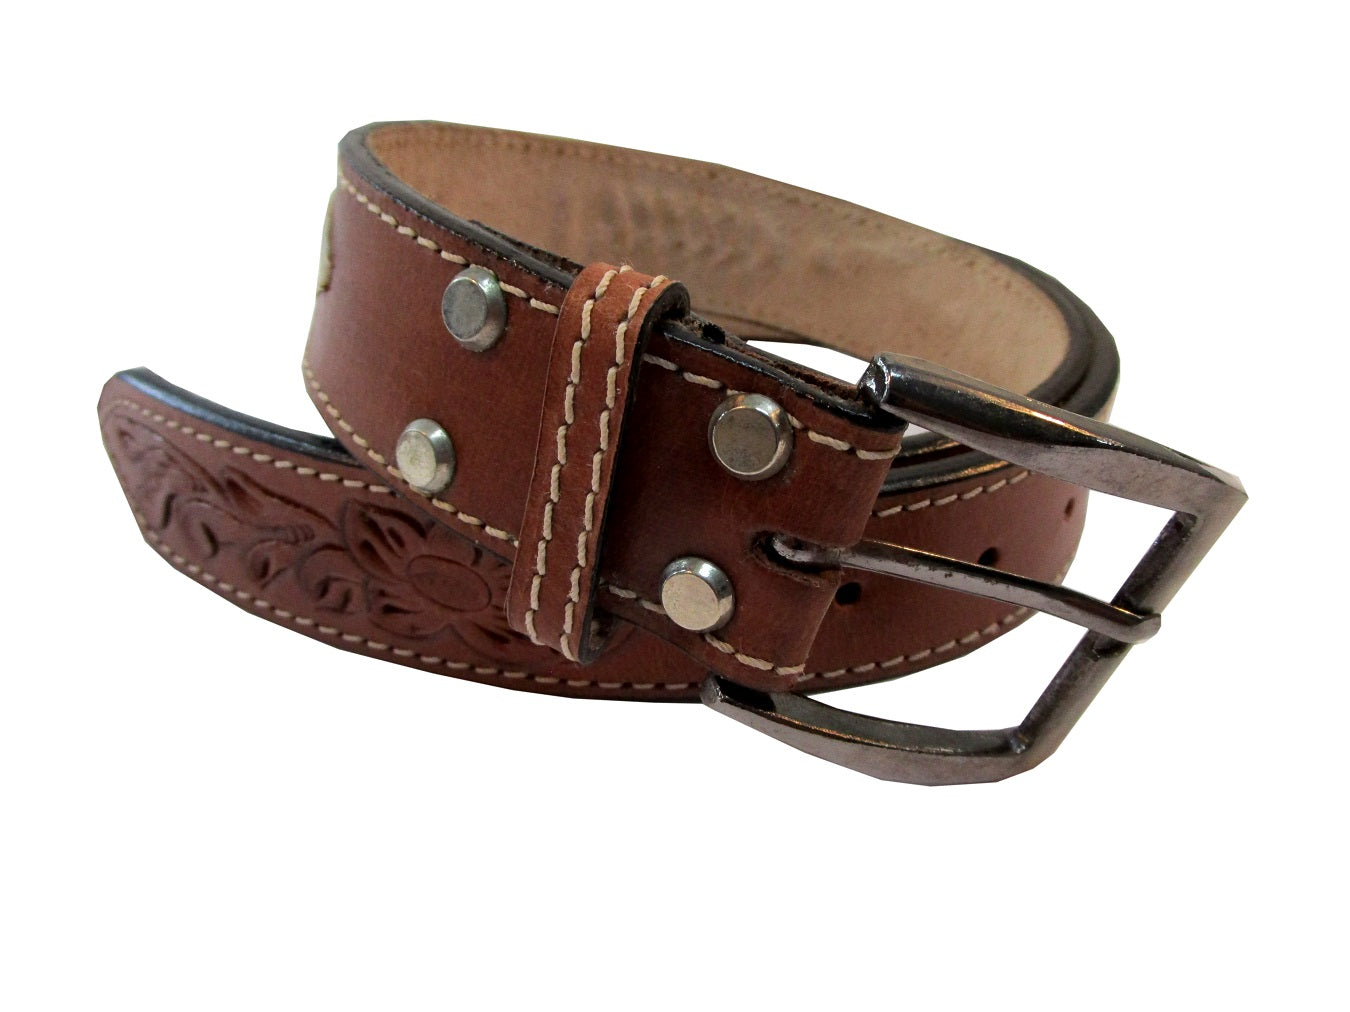 Mens Double Sided Leather Belt With Pin Buckle Black, 105CM Co Ideal For  Business Womens Belts For Jeans And Suits From S2ly, $6.74 | DHgate.Com